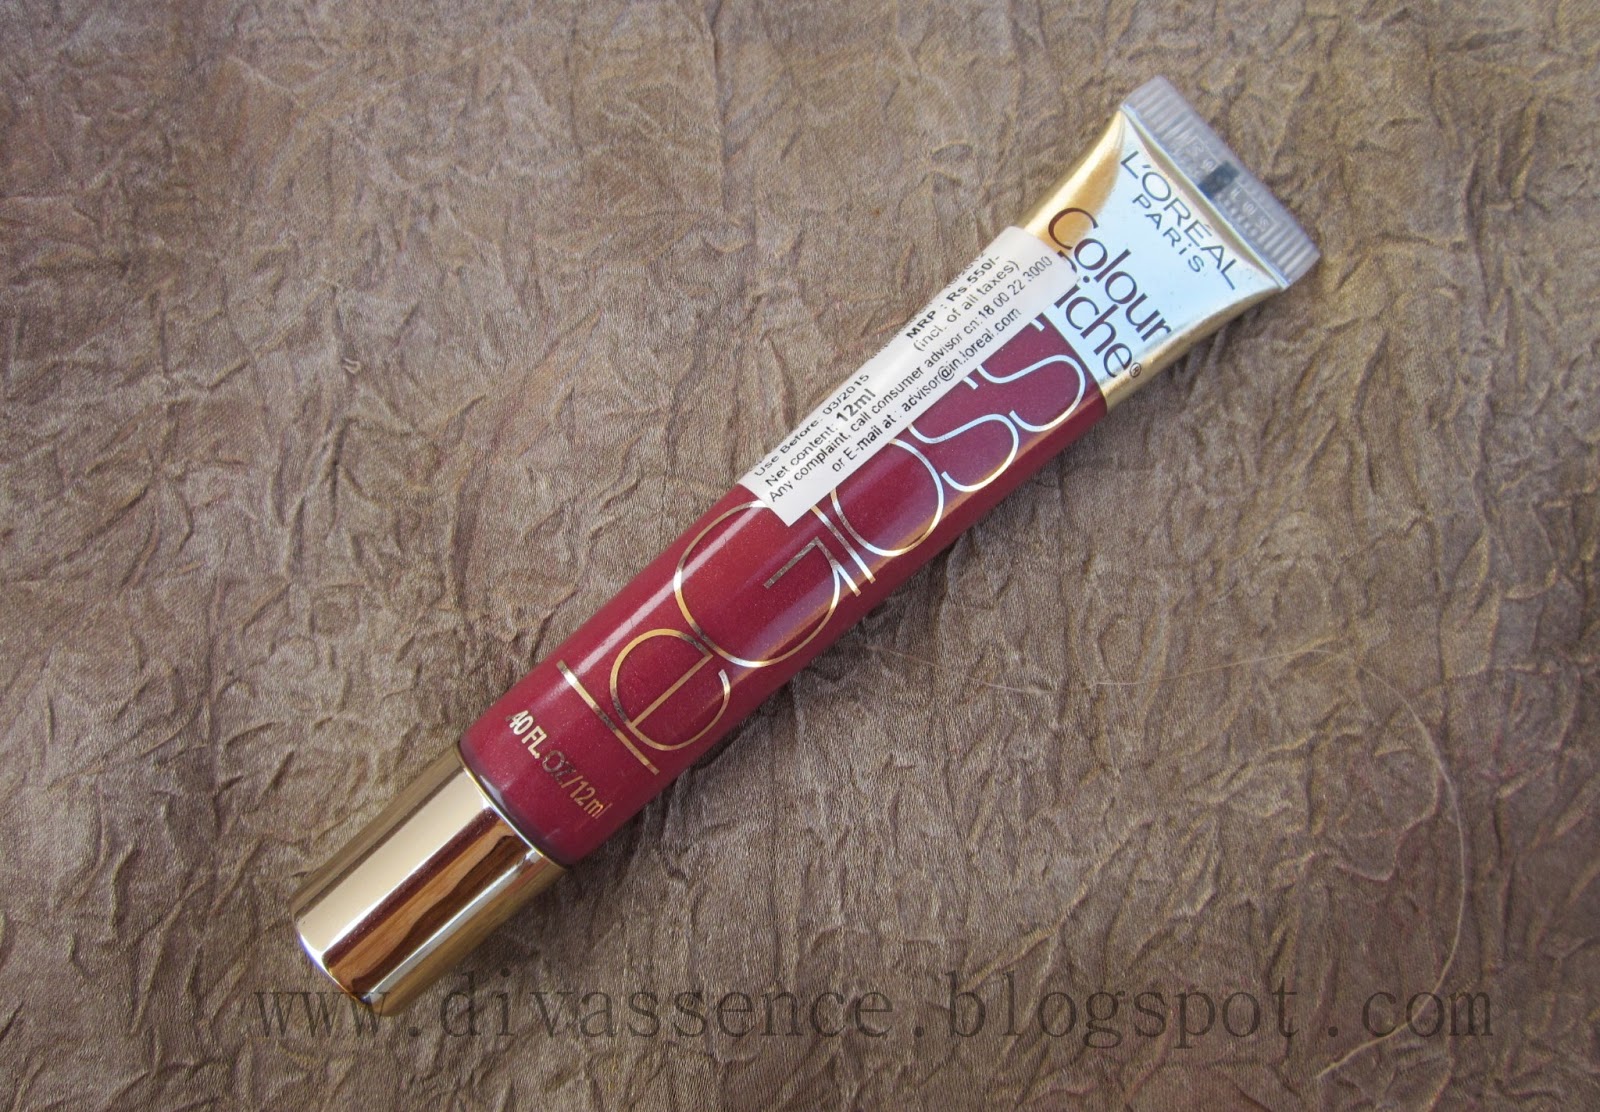 L'oreal Paris Color Riche Le Gloss in Blushing Berry: Review